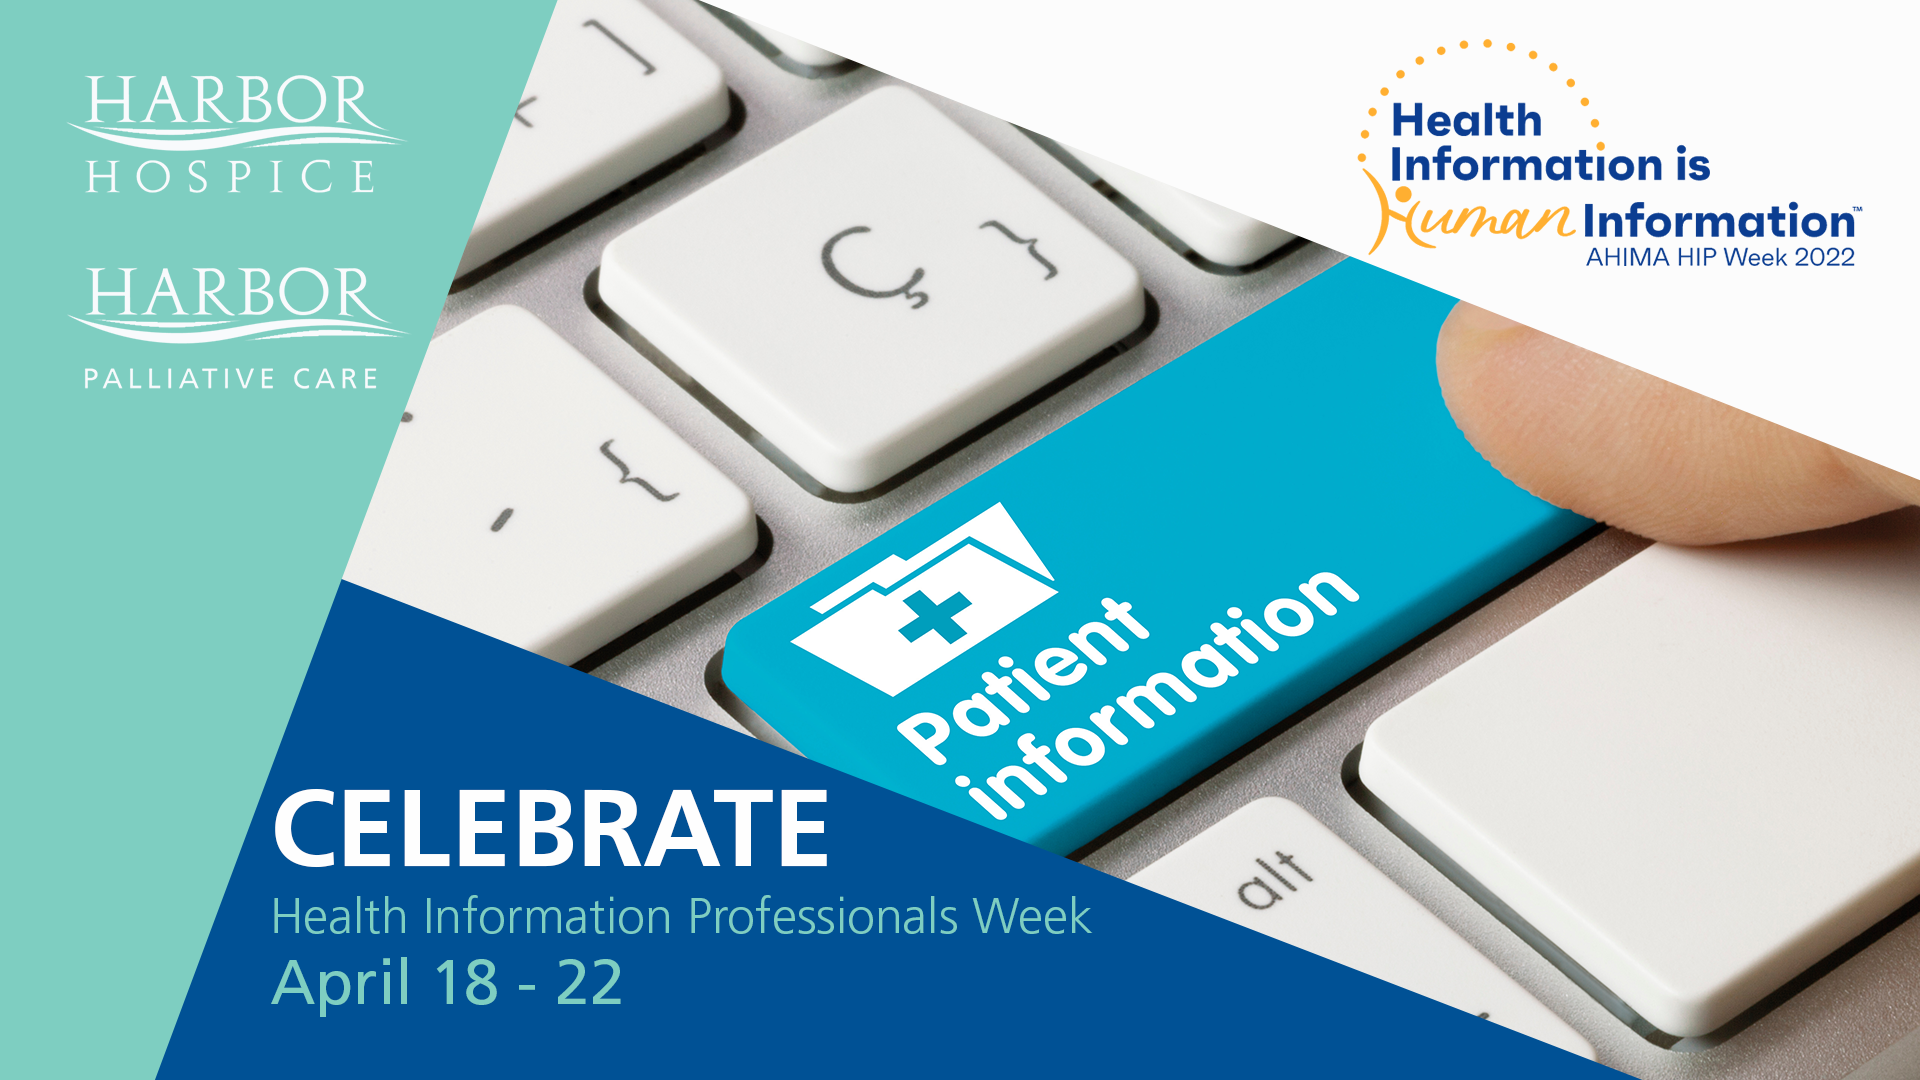 Announcement National Week Month health info profs - Health Information is Human Information. It's National Health Information Professionals Week